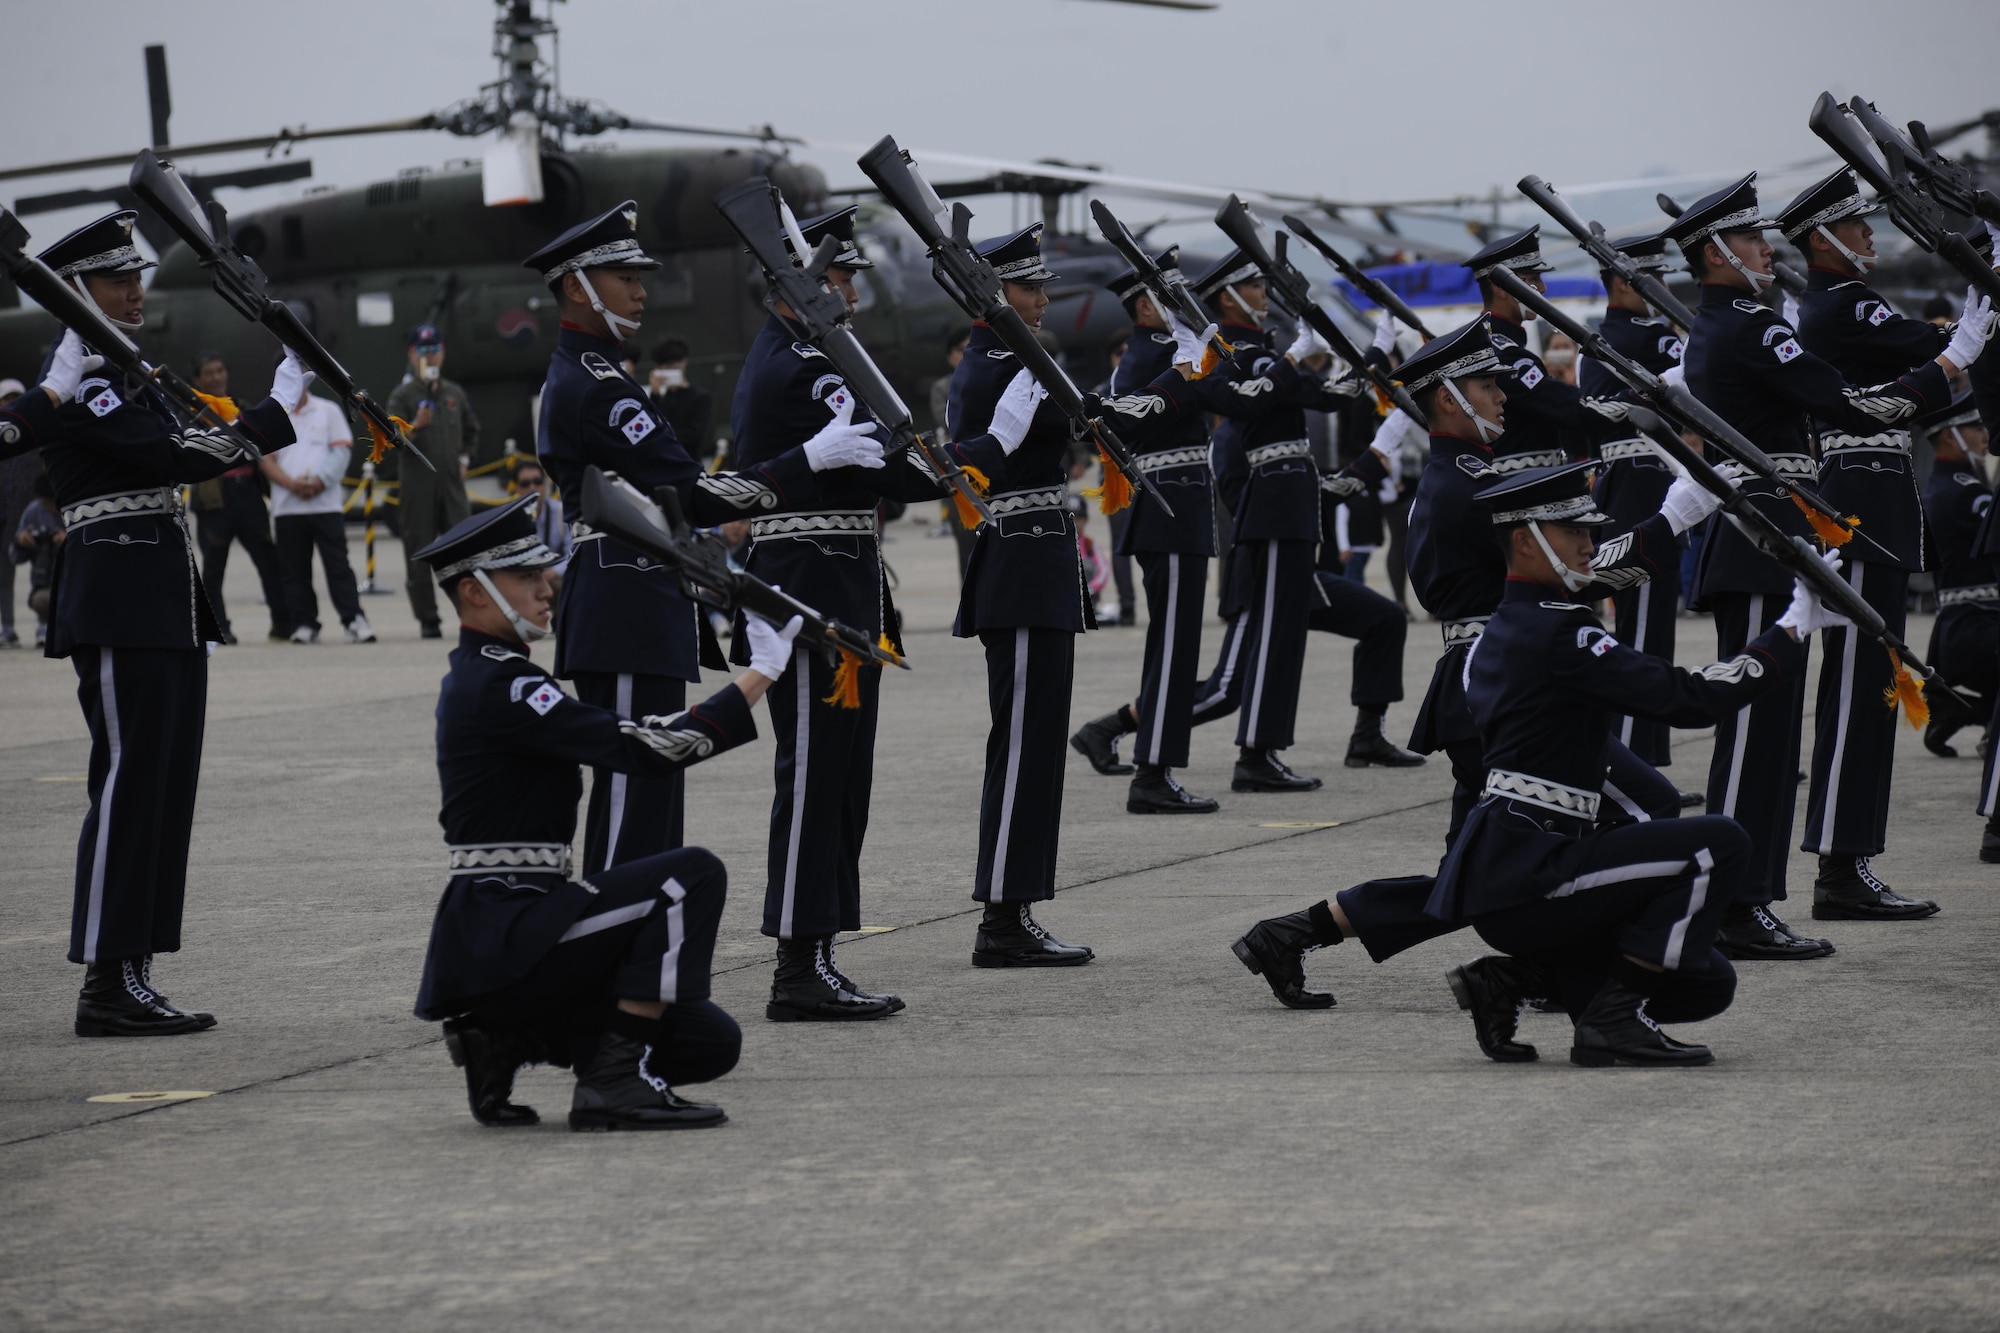 A military honor guard performs at the opening ceremony of the Sacheon Airshow at Sacheon Base, Republic of Korea, Oct. 20, 2016. 7th Air Force provided both an F-16 and A-10 Thunderbolt II static display for the four-day airshow, showcasing U.S. Air Force capabilities to over 260,000 attendees. (U.S. Air Force photo by 1st Lt. Lauren Linscott/Released)